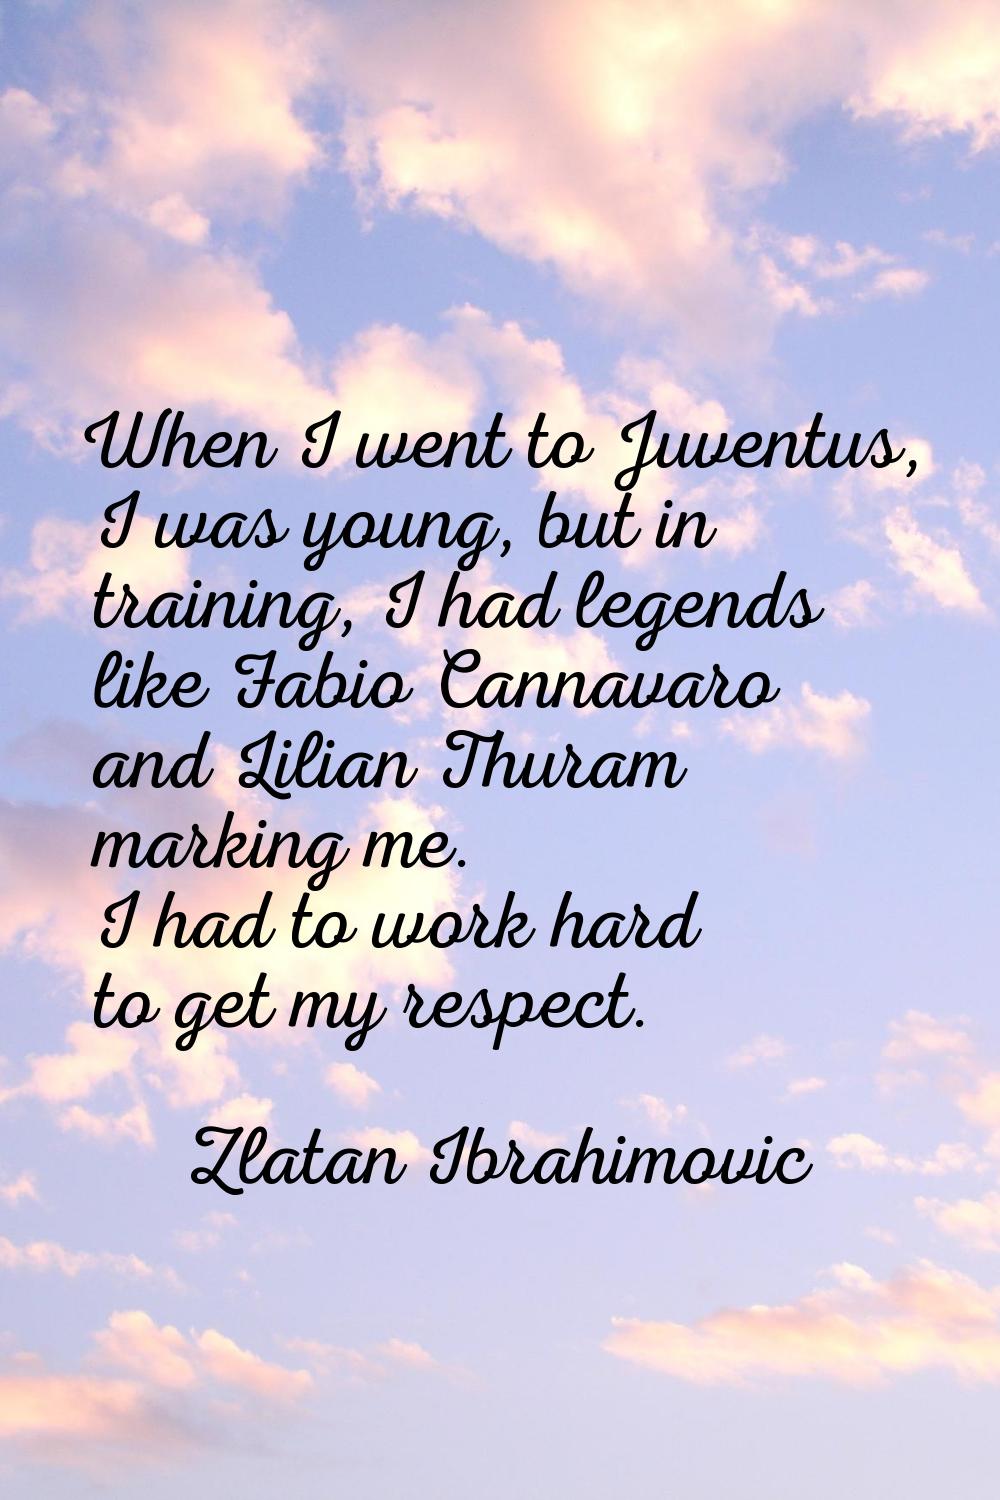 When I went to Juventus, I was young, but in training, I had legends like Fabio Cannavaro and Lilia